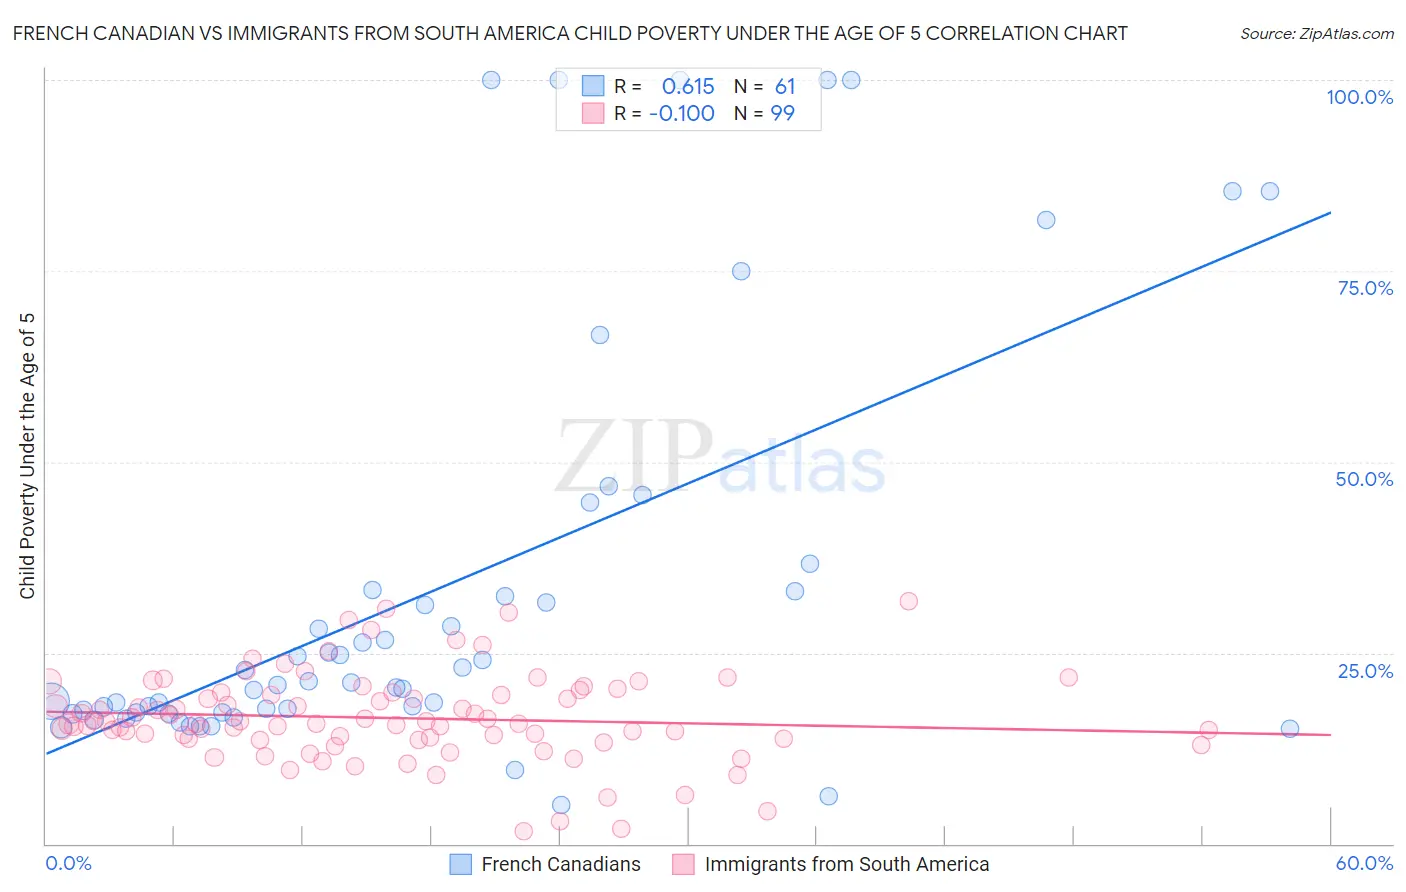 French Canadian vs Immigrants from South America Child Poverty Under the Age of 5